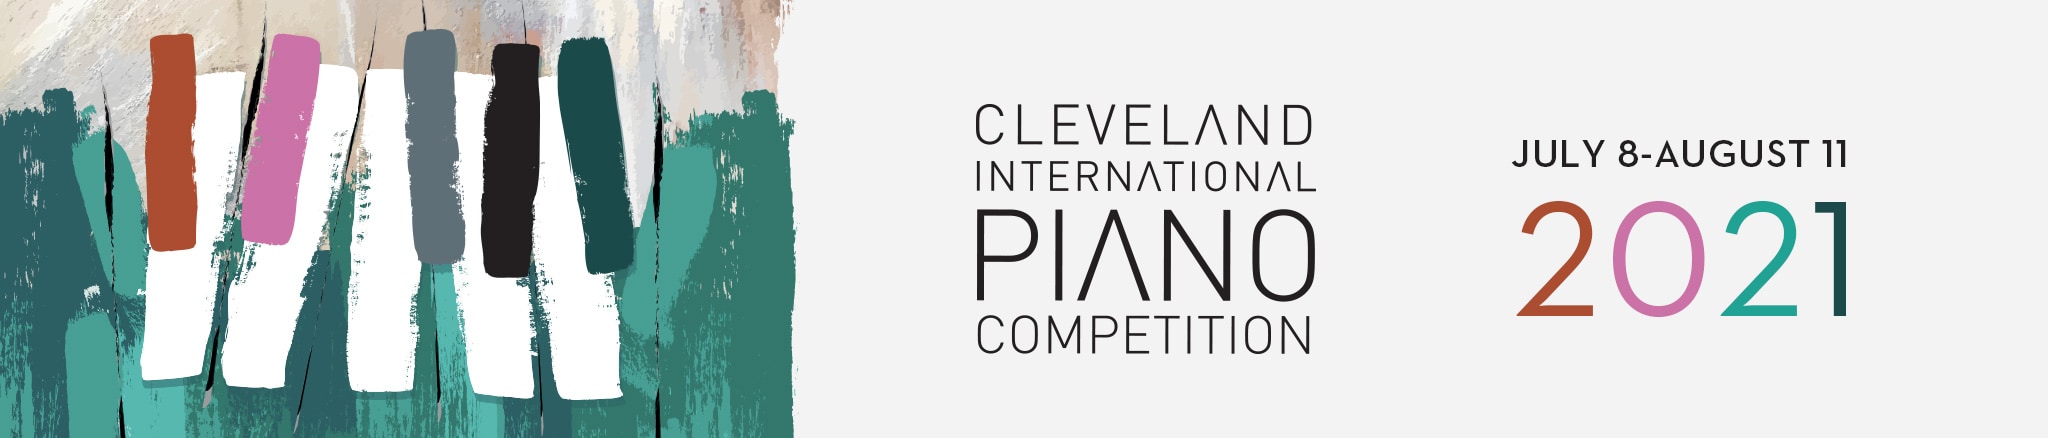 Cleveland International Piano Competition 2021